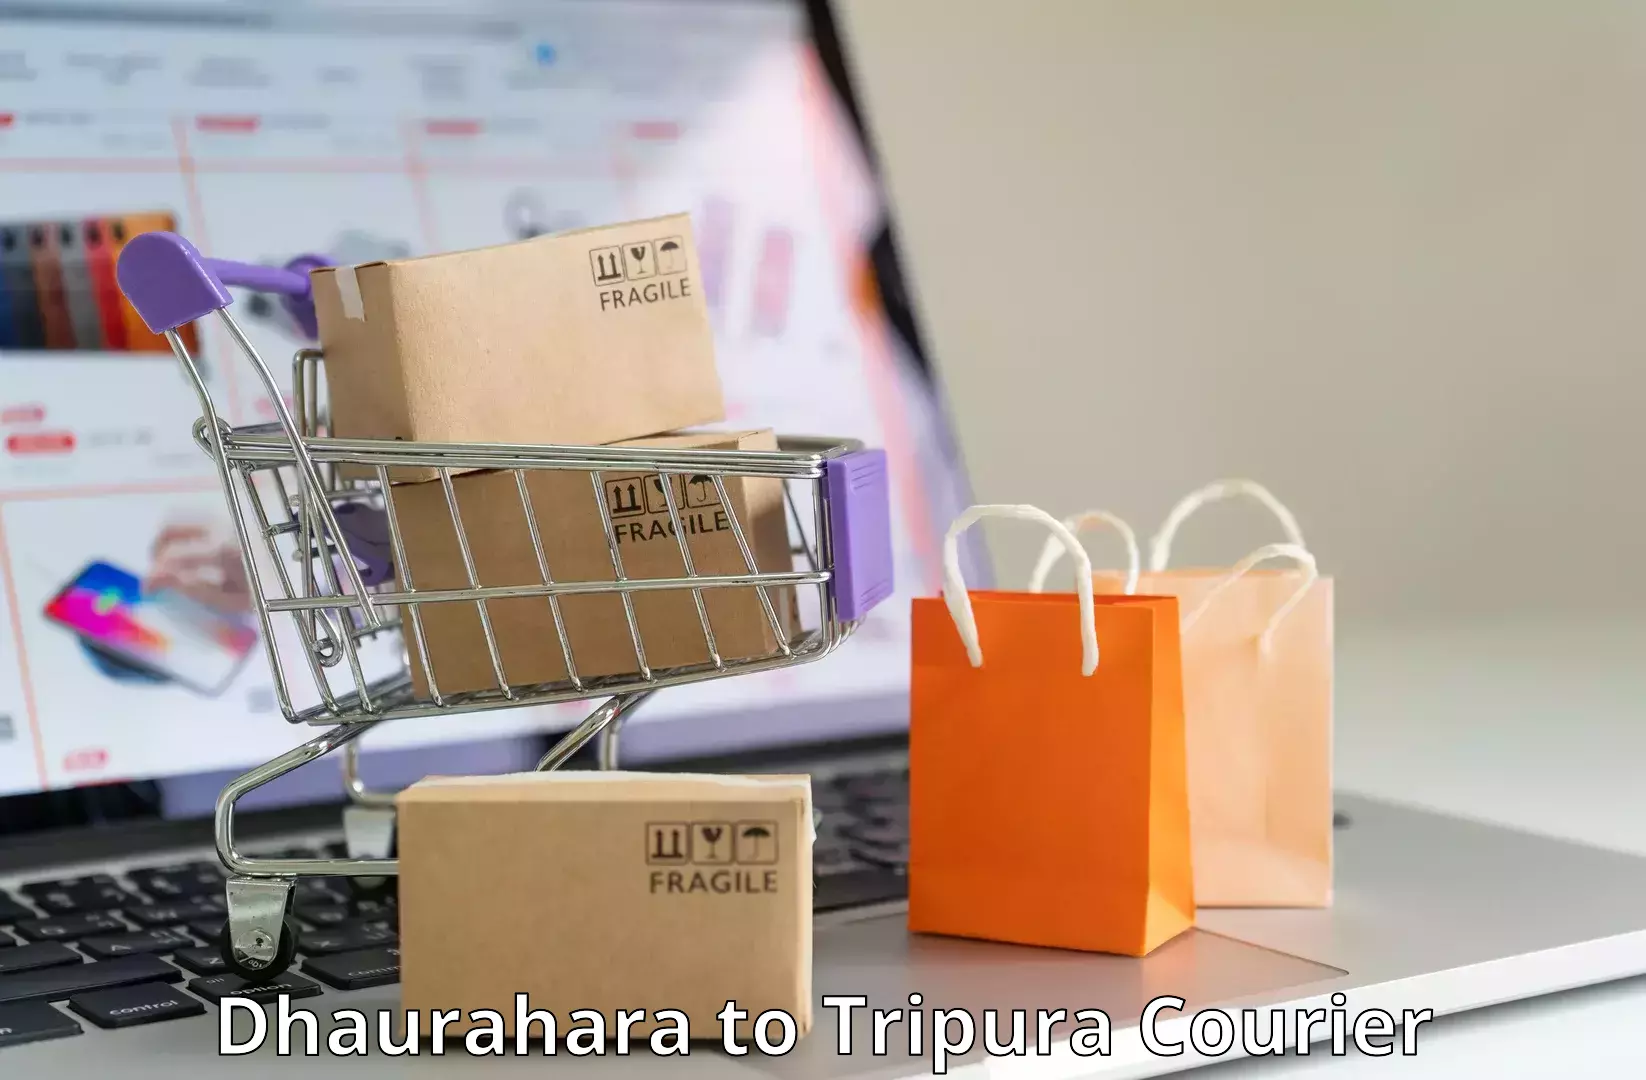 Next-day delivery options Dhaurahara to Dharmanagar